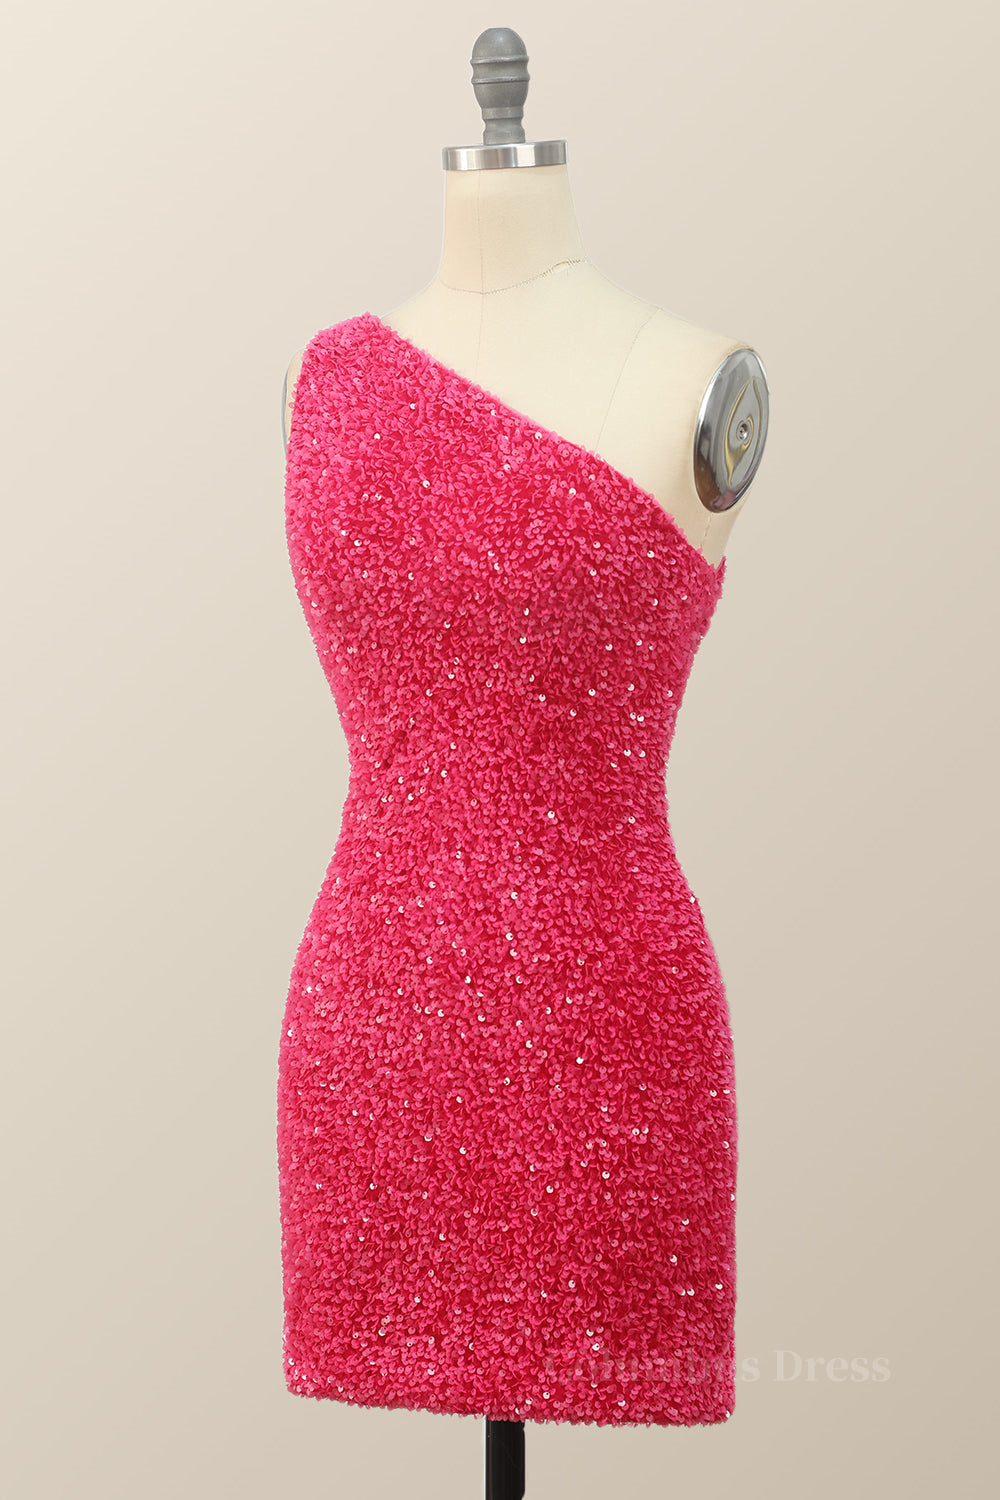 Homecoming Dress Boutiques, Sparkle One Shoulder Hot Pink Sequin Party Dress